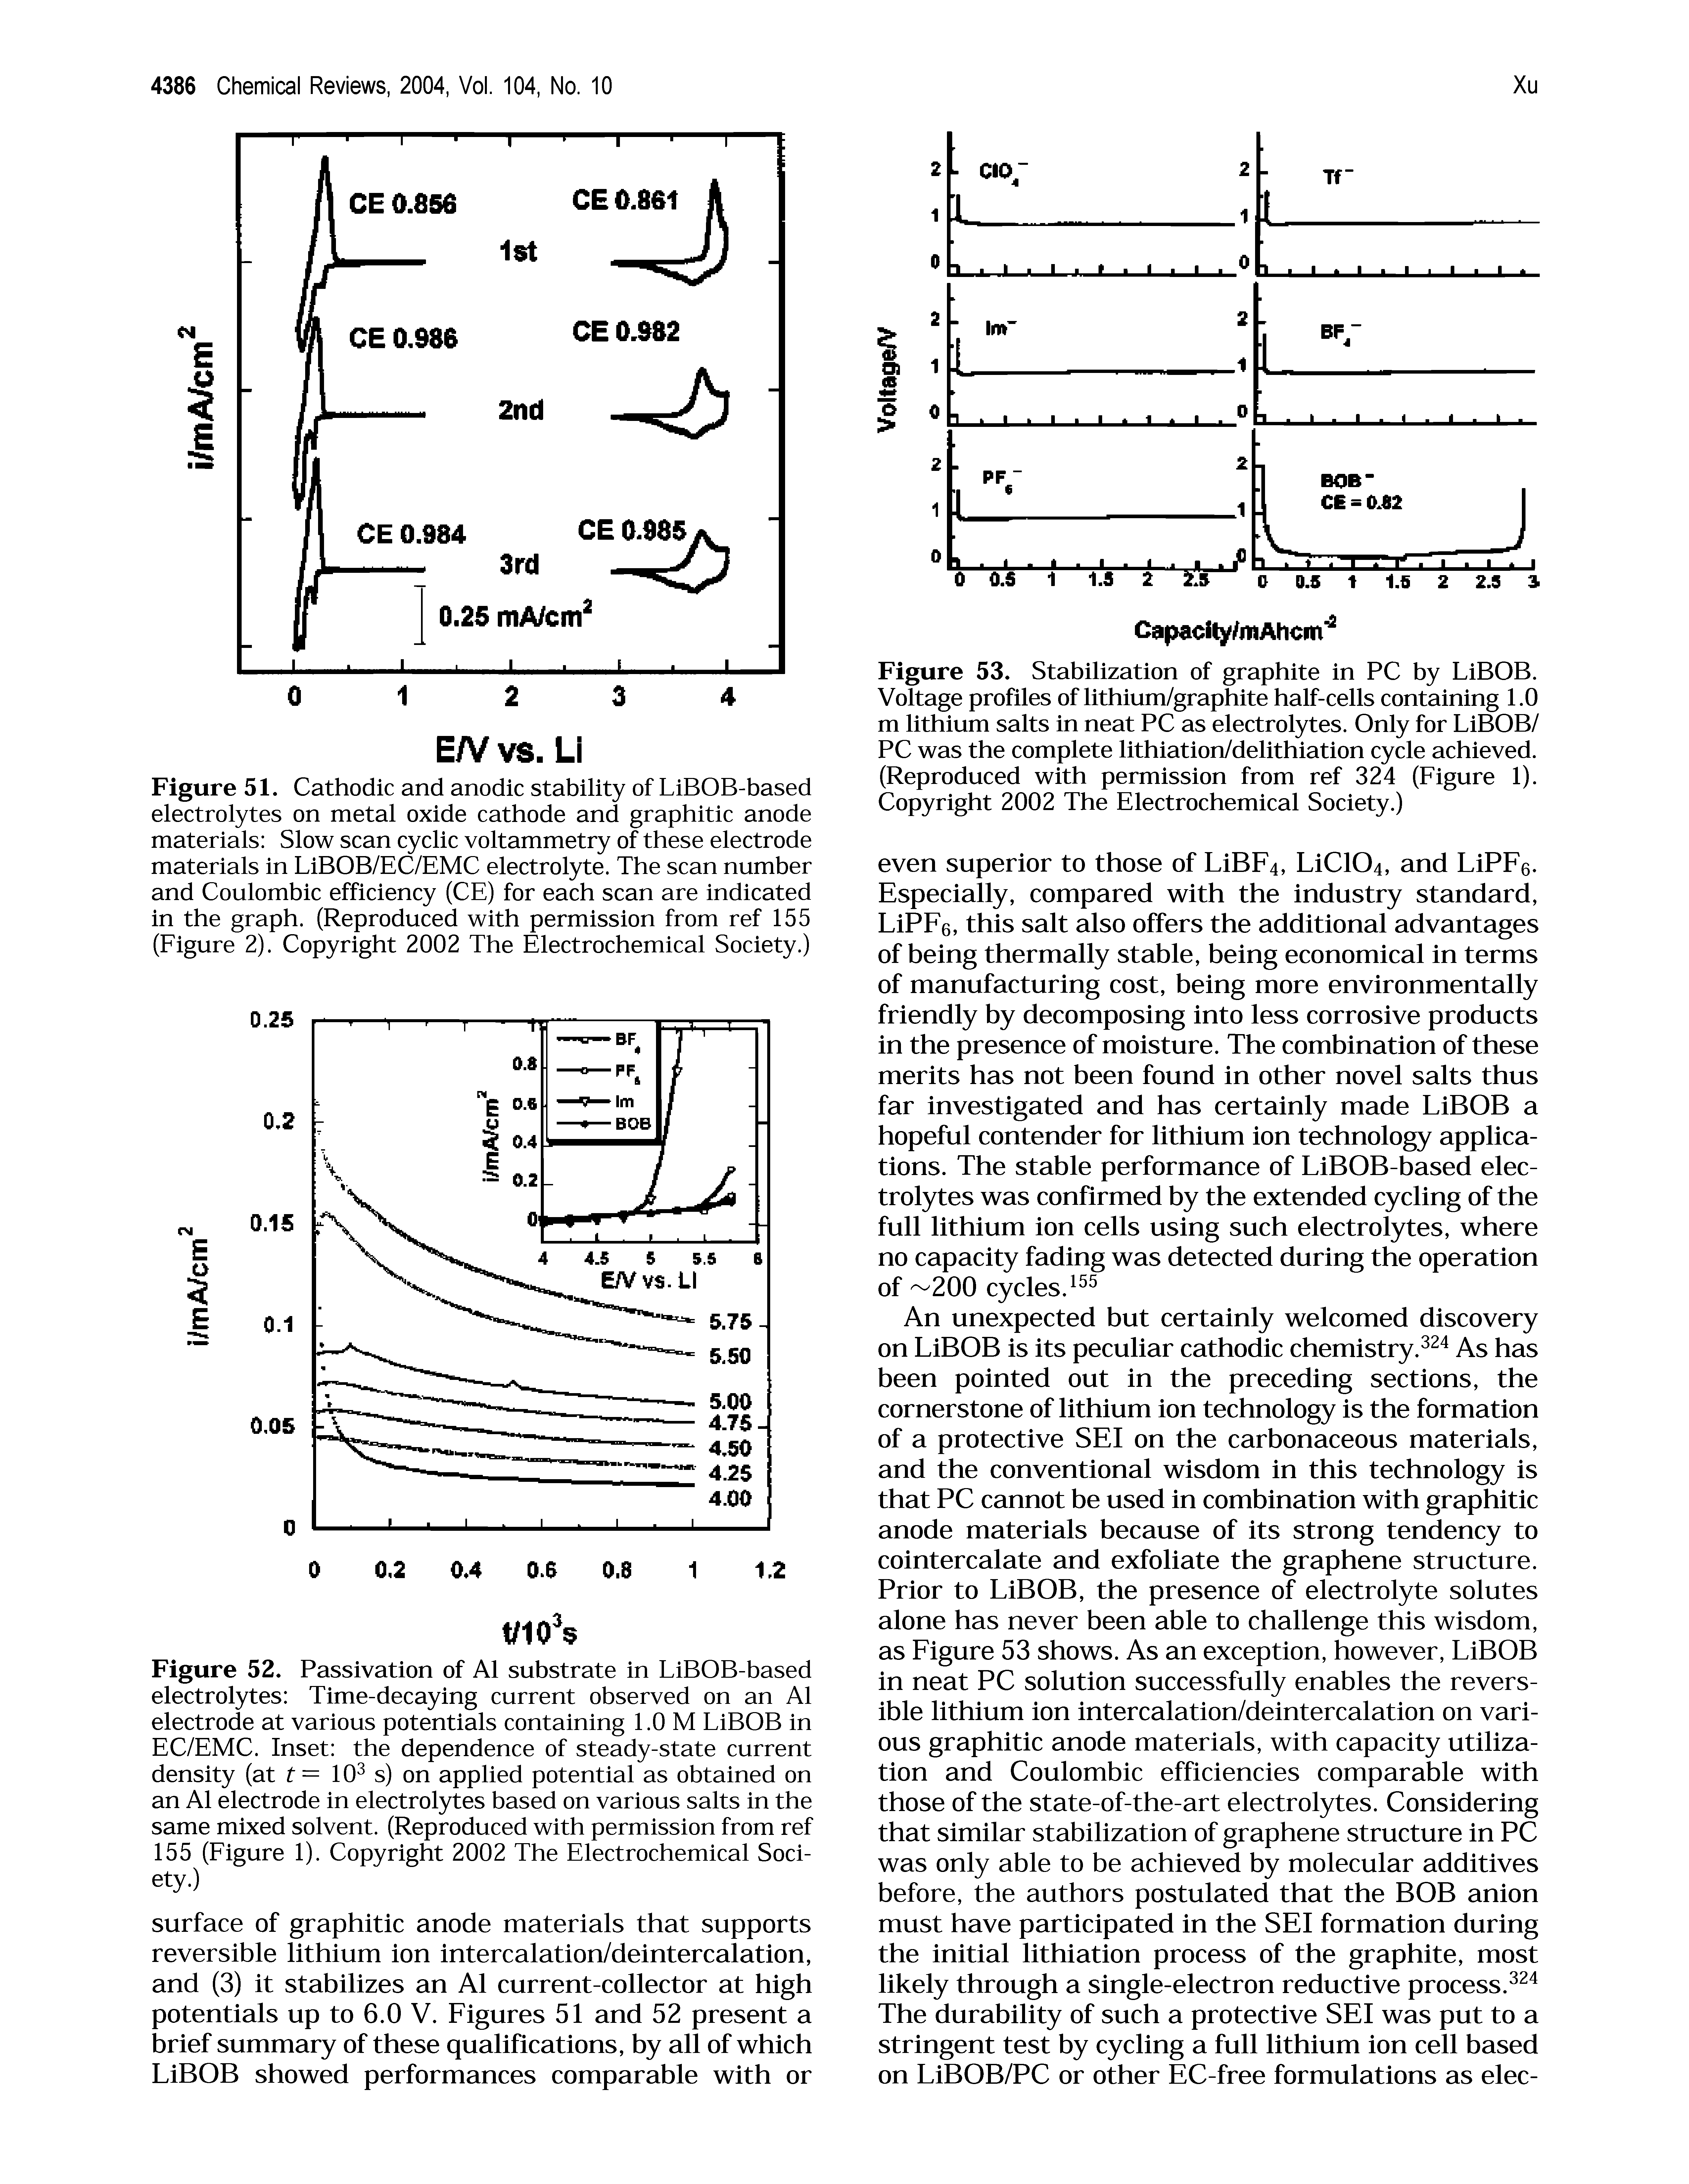 Figure 53. Stabilization of graphite in PC by LiBOB. Voltage profiles of lithium/graphite half-cells containing 1.0 m lithium salts in neat PC as electrolytes. Only for LiBOB/ PC was the complete lithiation/delithiation cycle achieved. (Reproduced with permission from ref 324 (Figure 1). Copyright 2002 The Electrochemical Society.)...